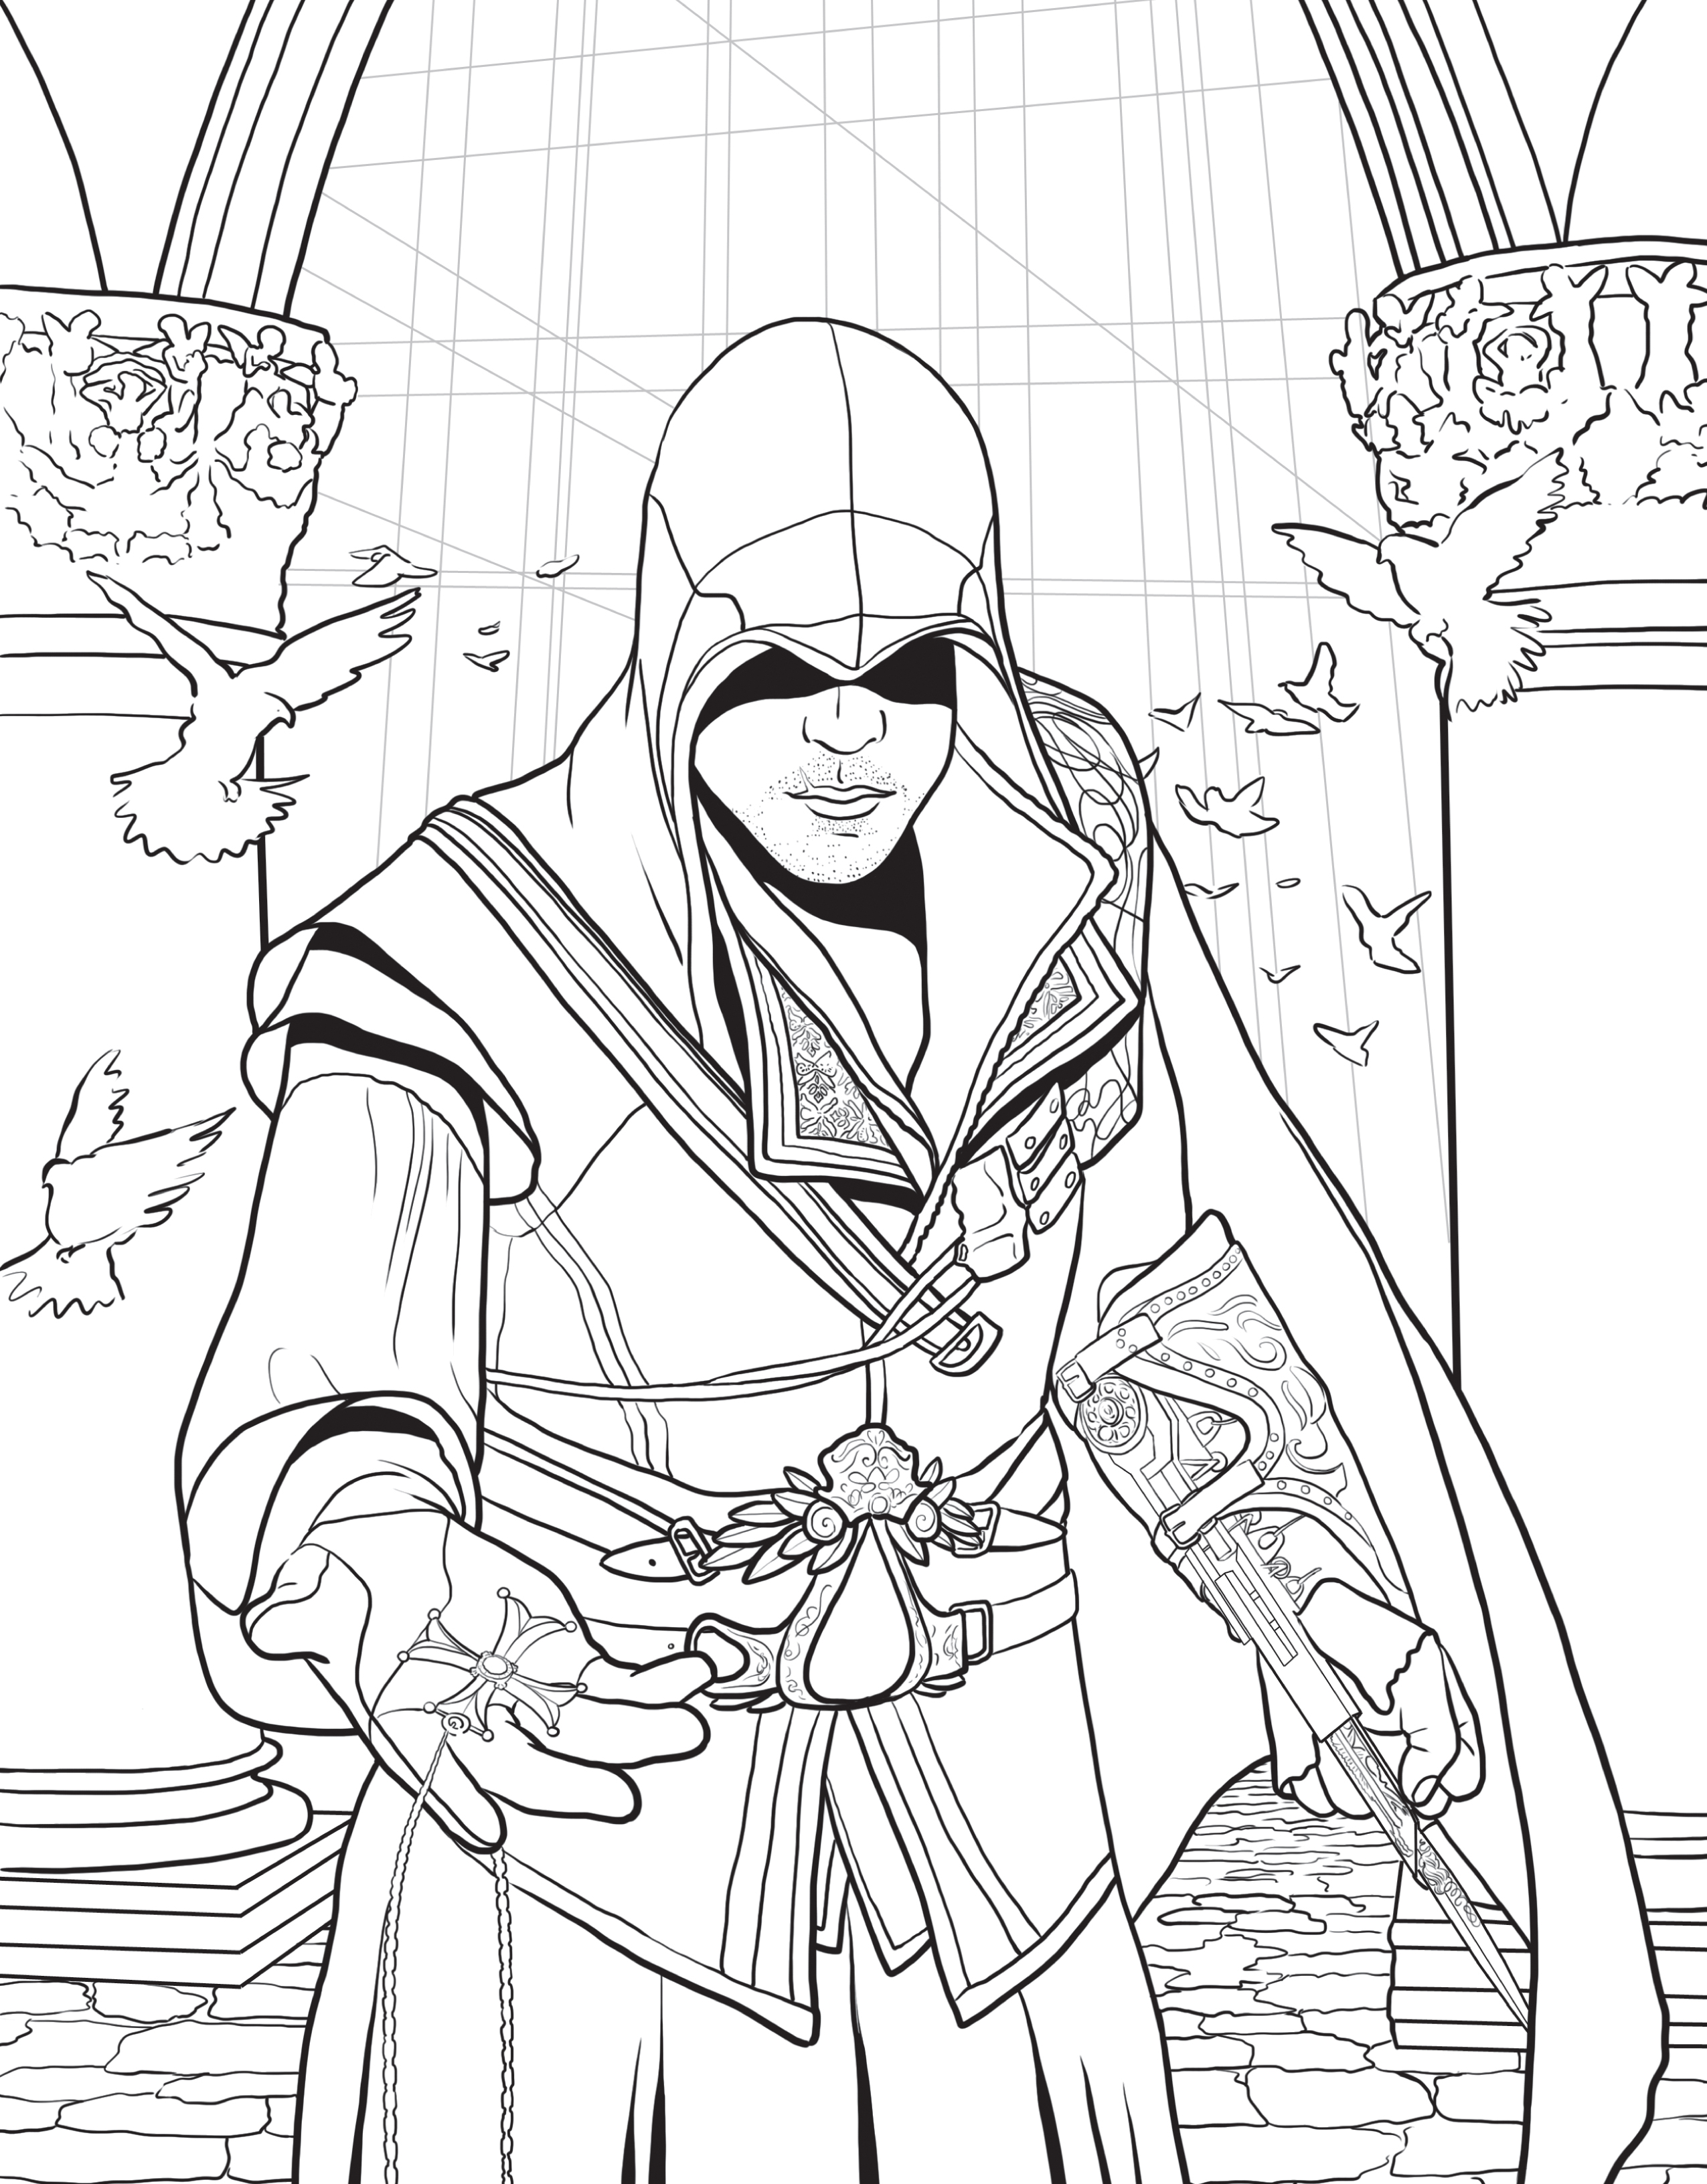 Assassin's Creed Coloring Pages Pdf to Print - Assassins Creed Coloring Pages printable